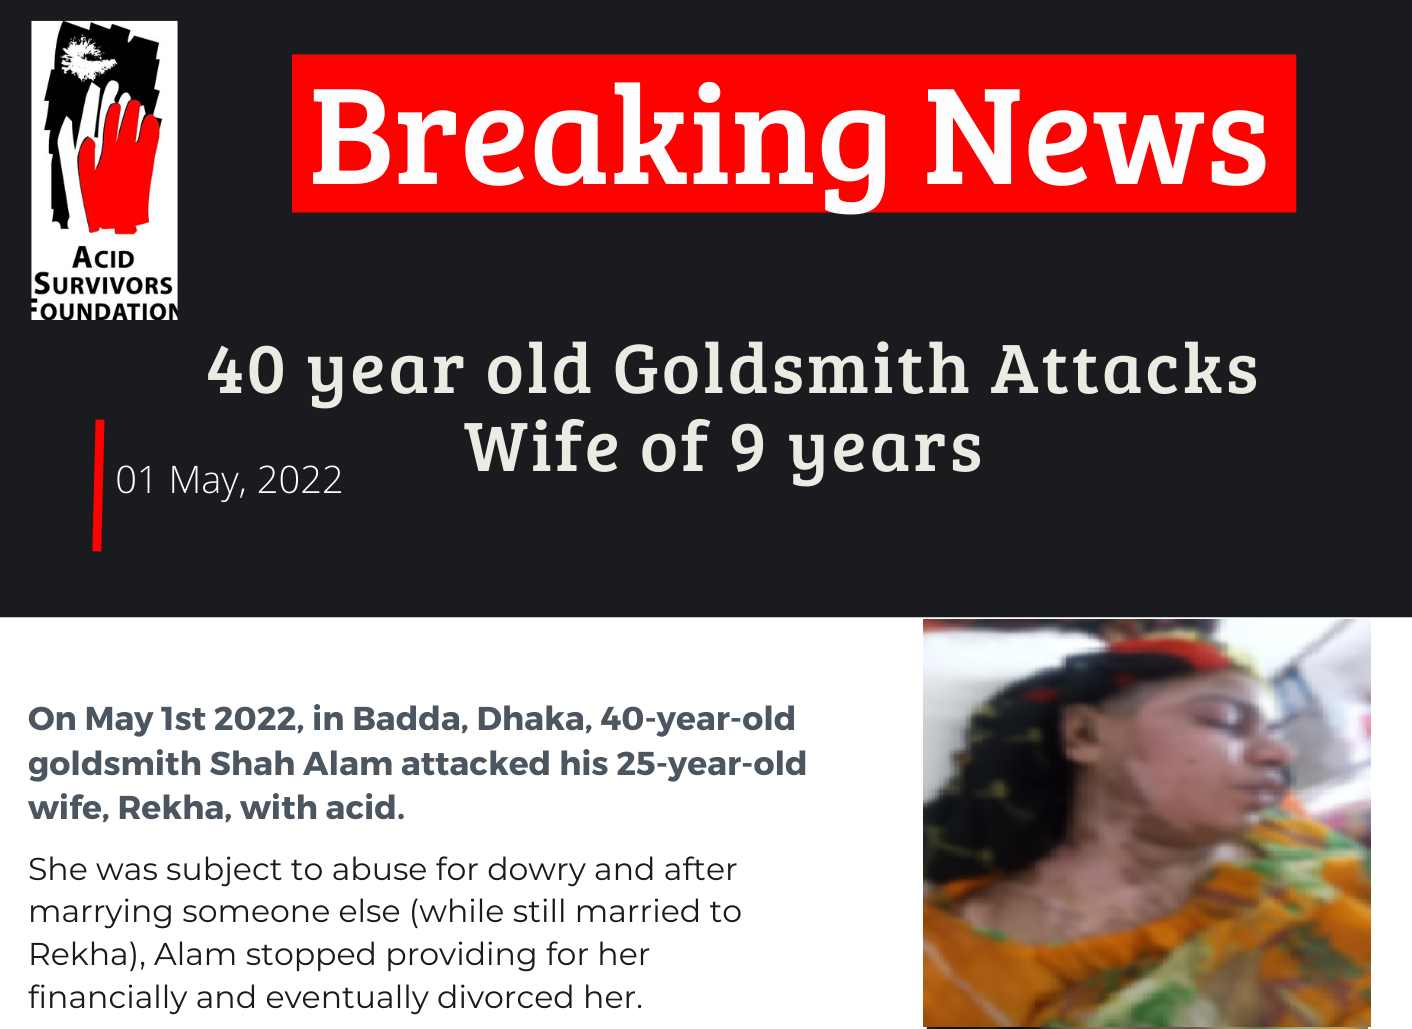 40 years old goldsmith attacks wife (Rekha) of 9 years